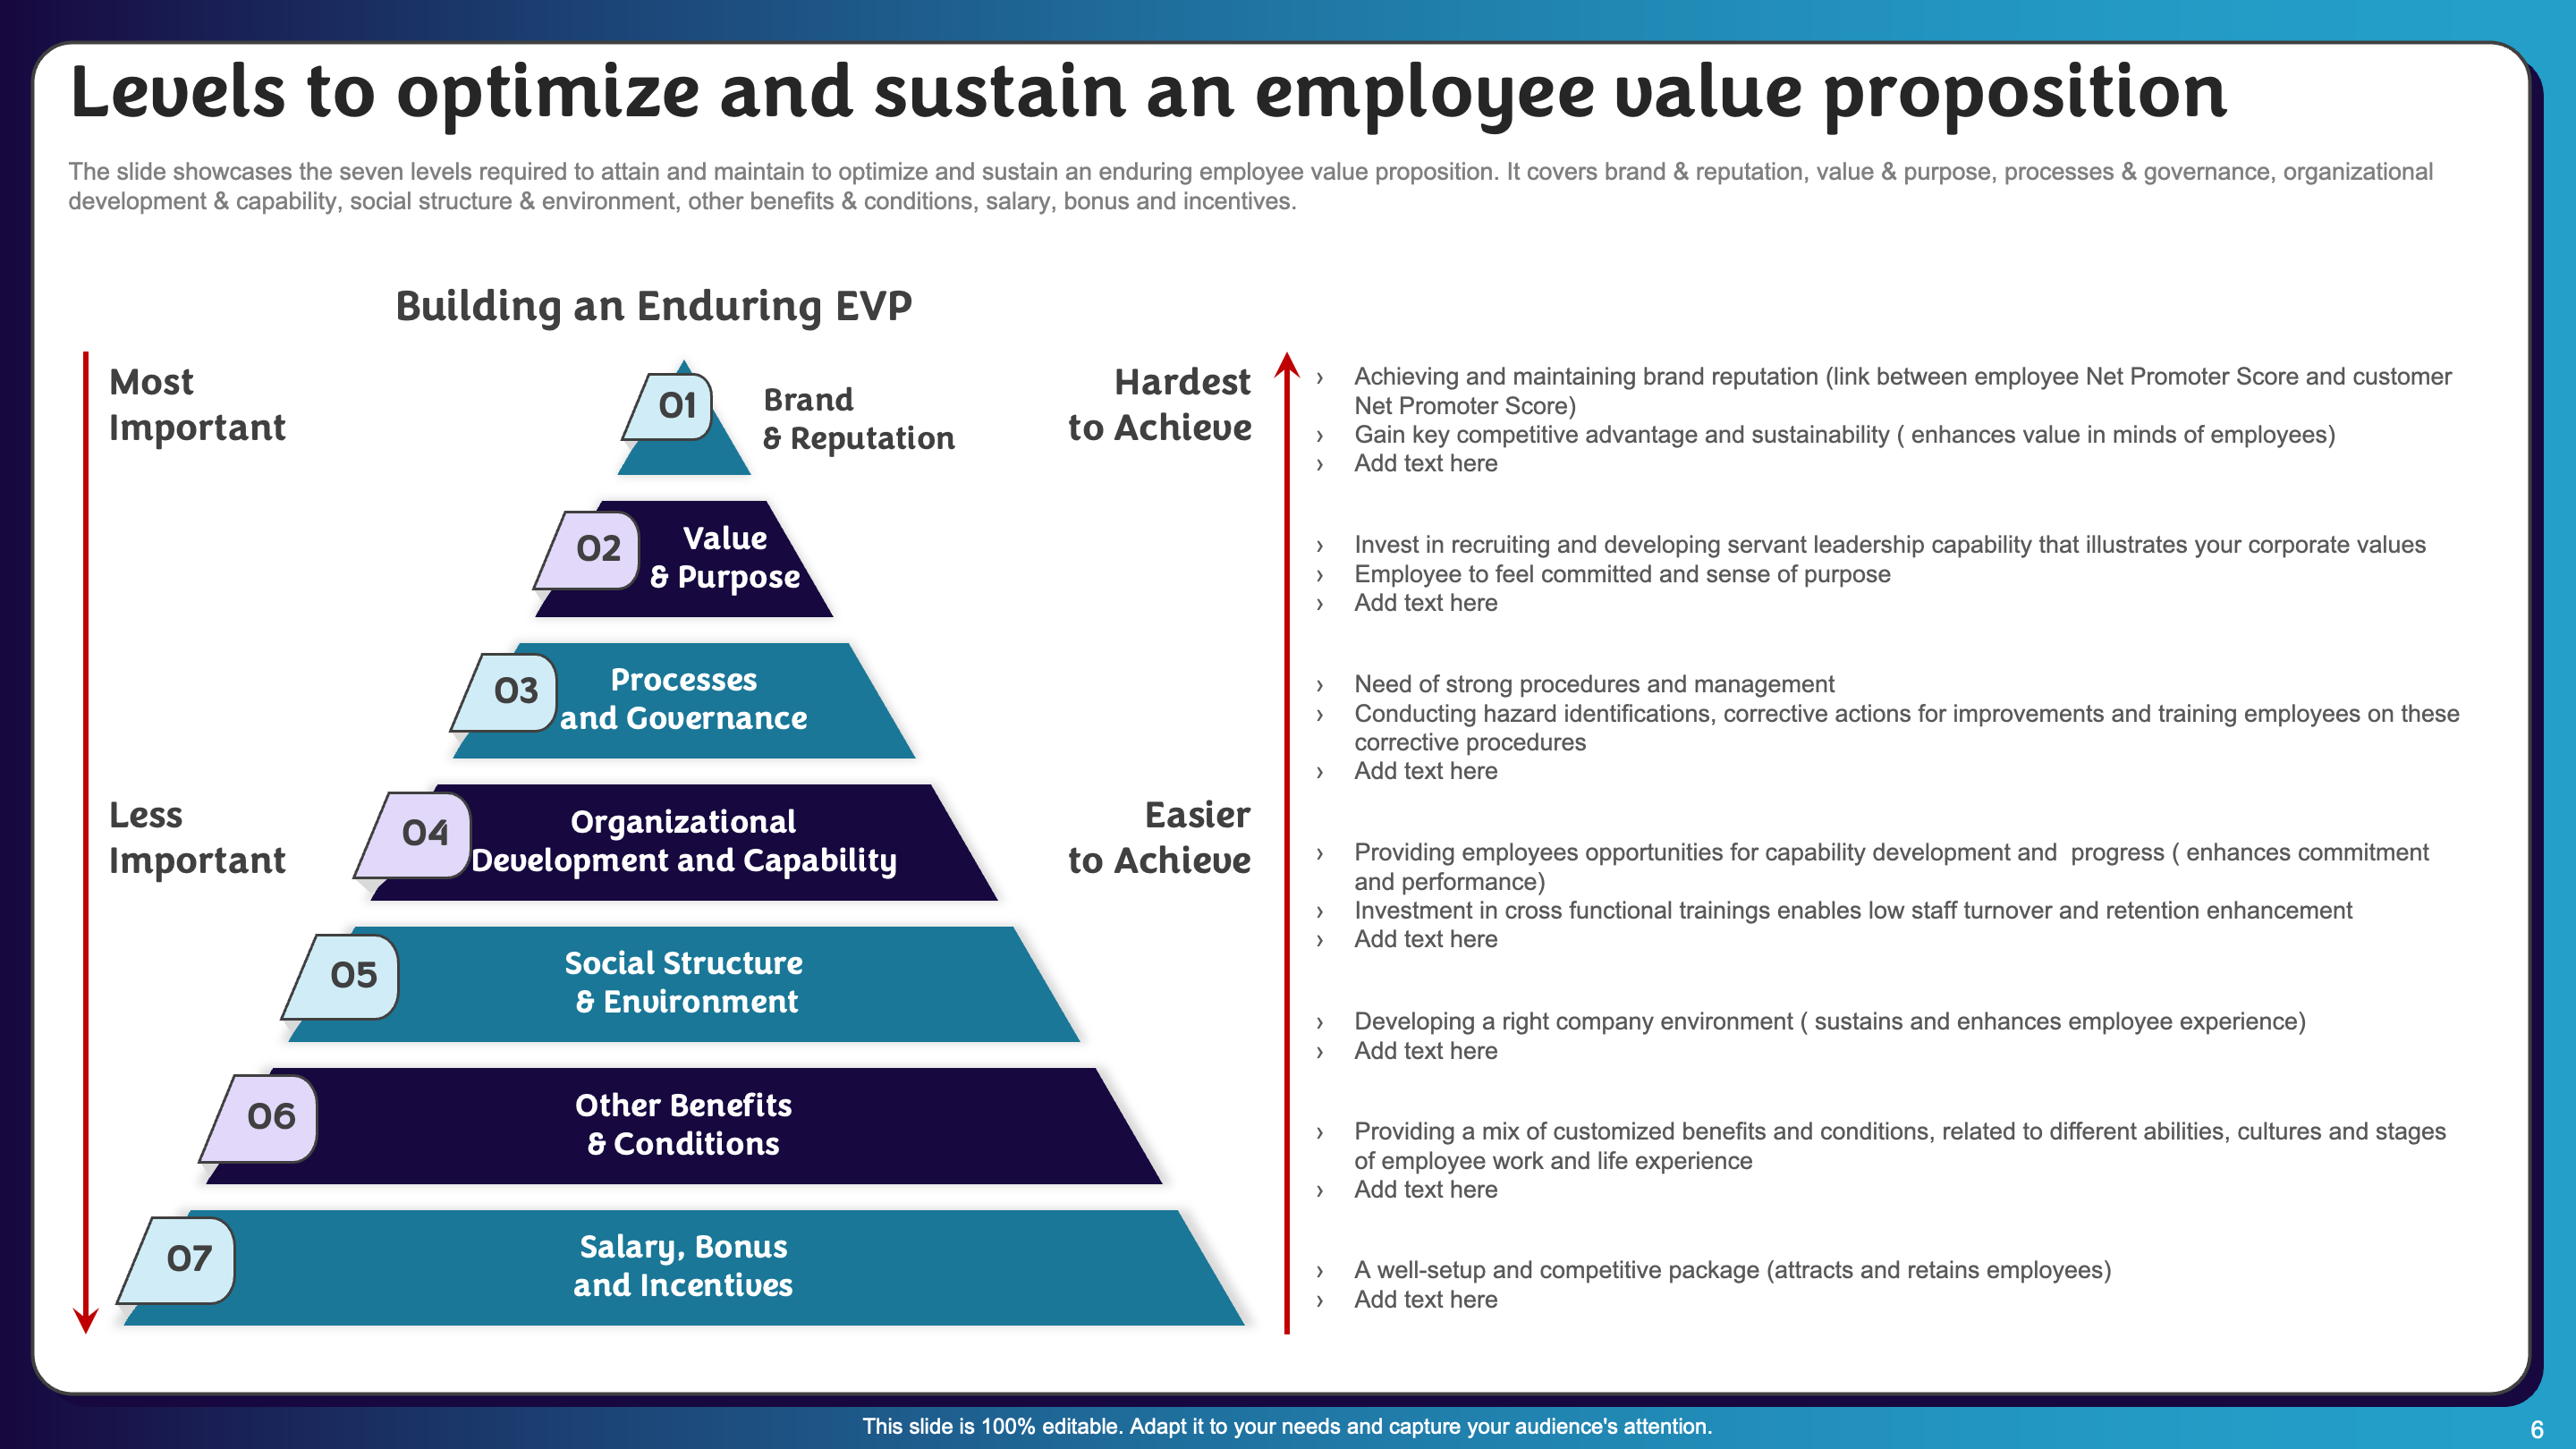 Levels to optimize and sustain an EVP